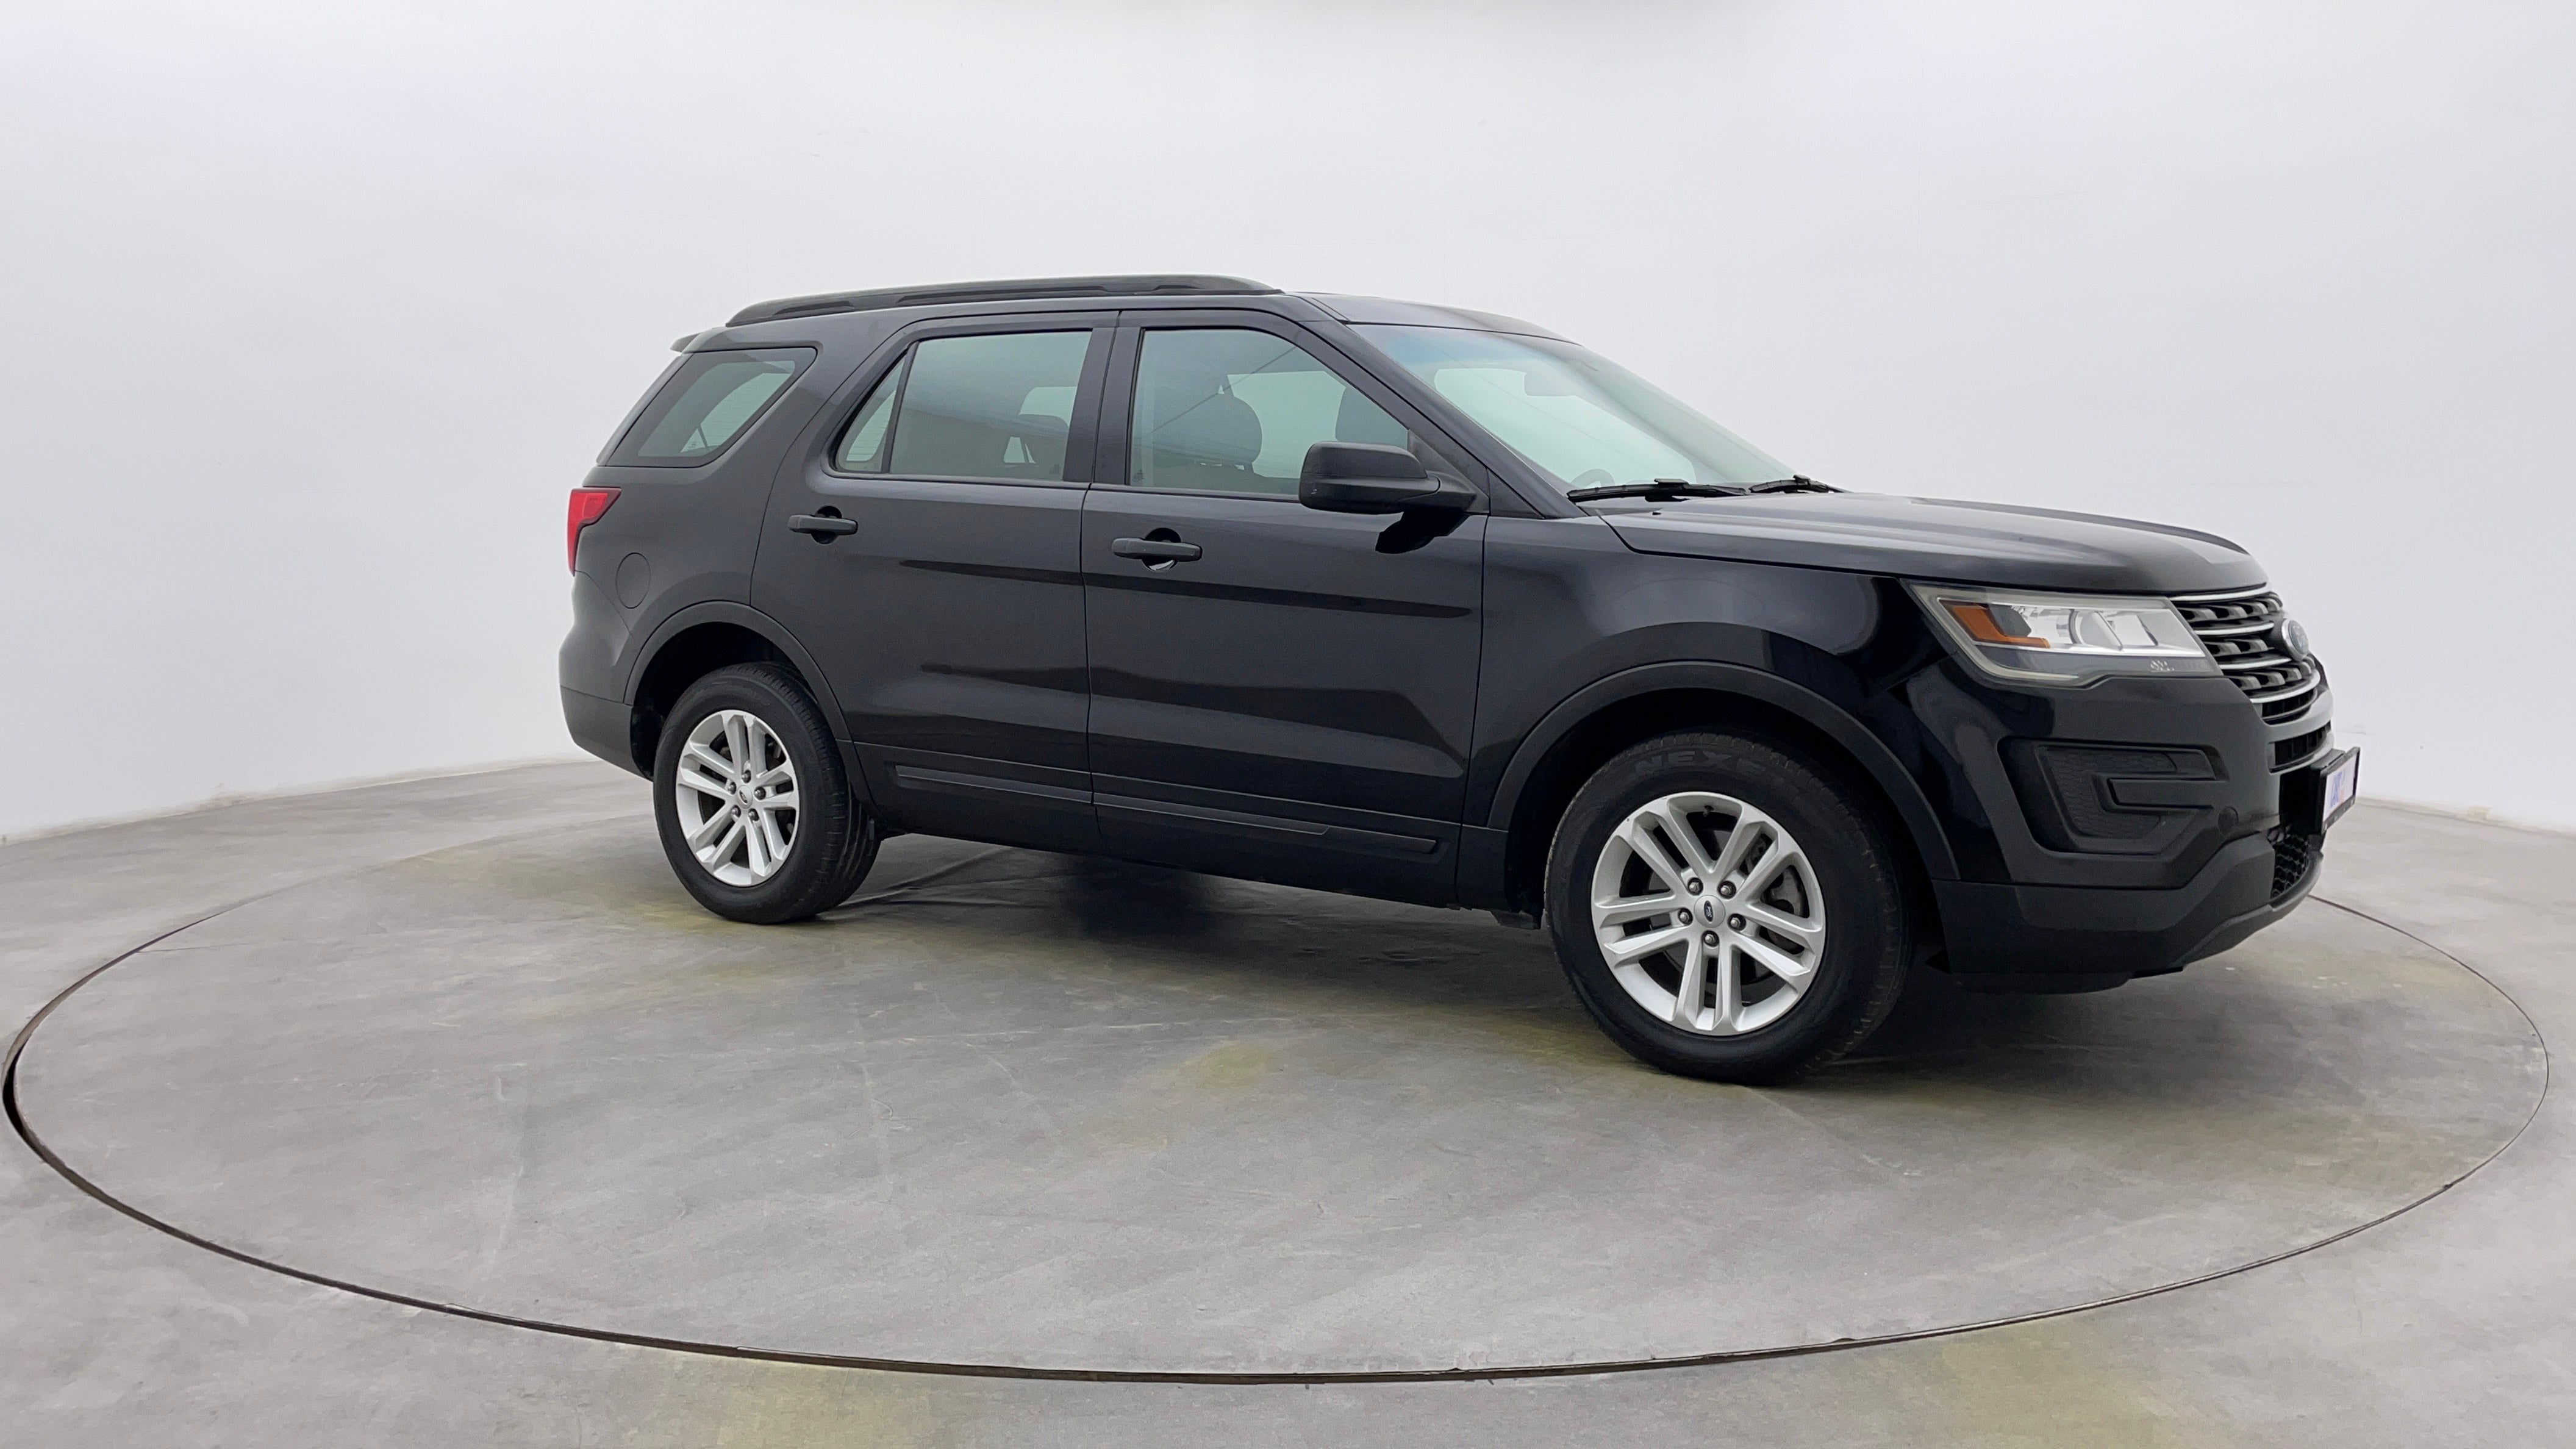 Ford Explorer-Right Front Diagonal (45- Degree) View